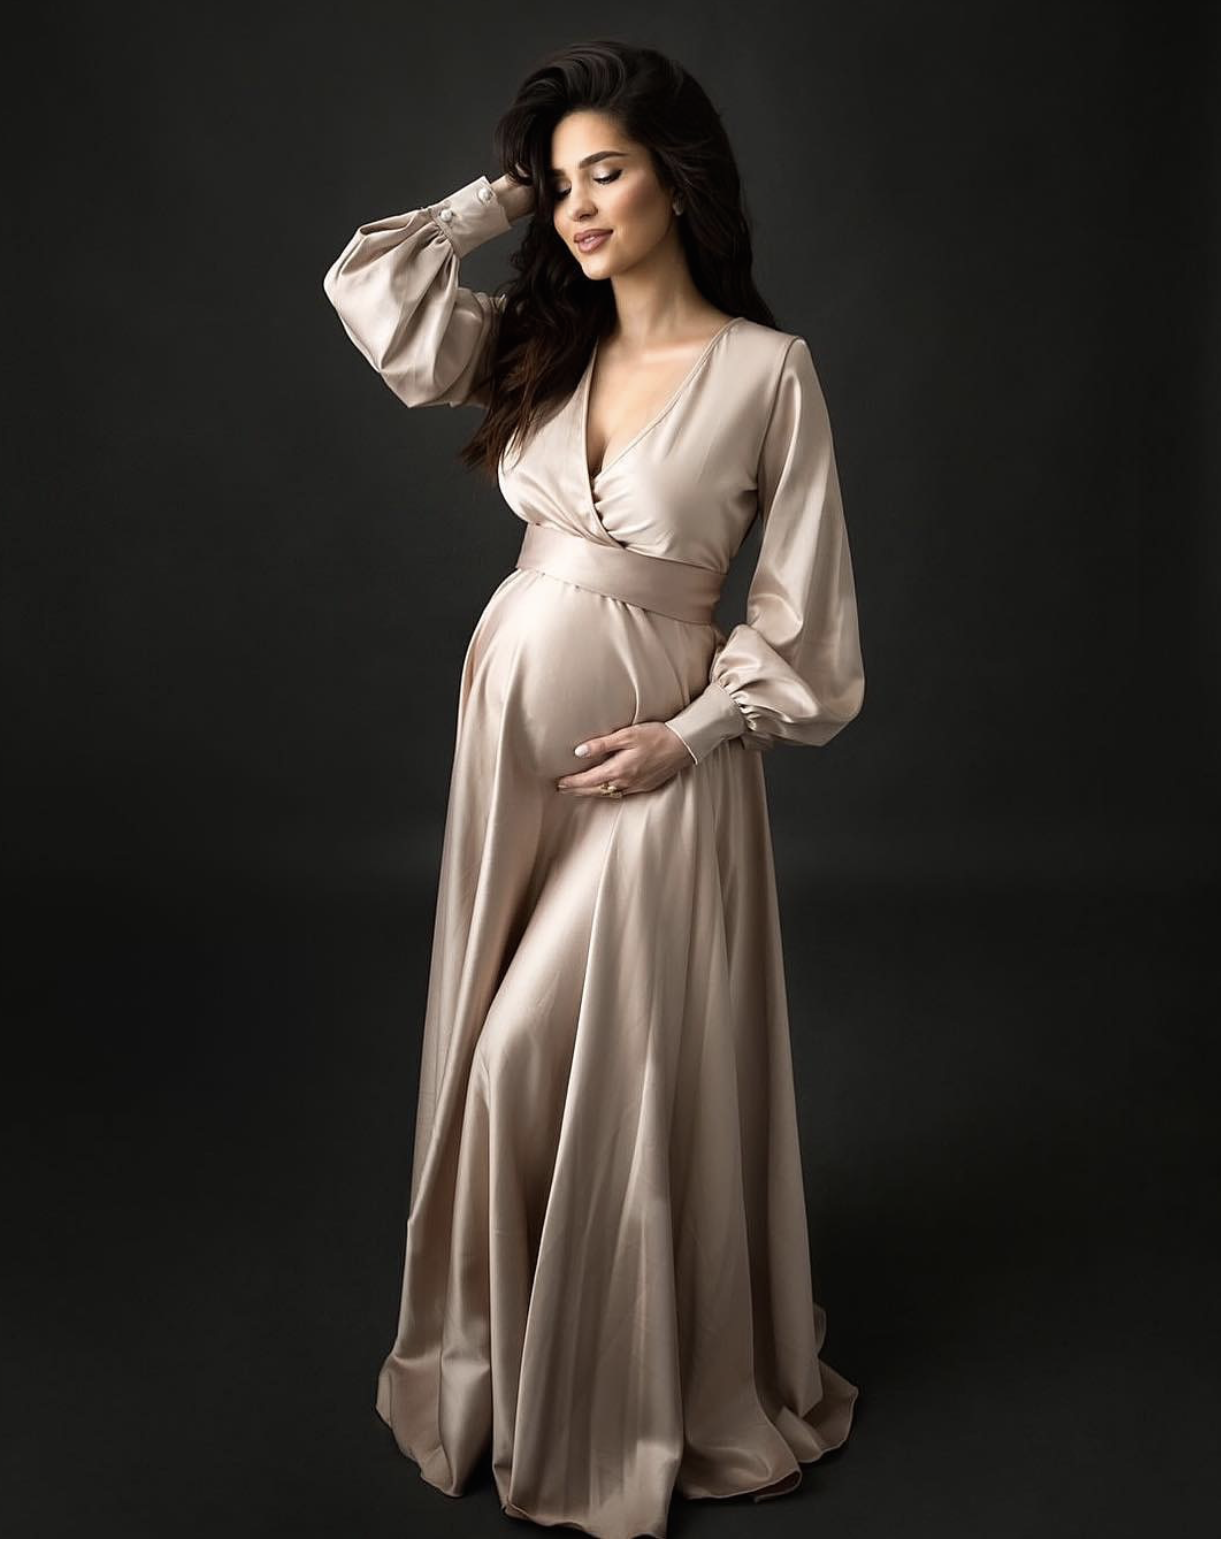 Look
stylish while attending a party with
  maternity gowns